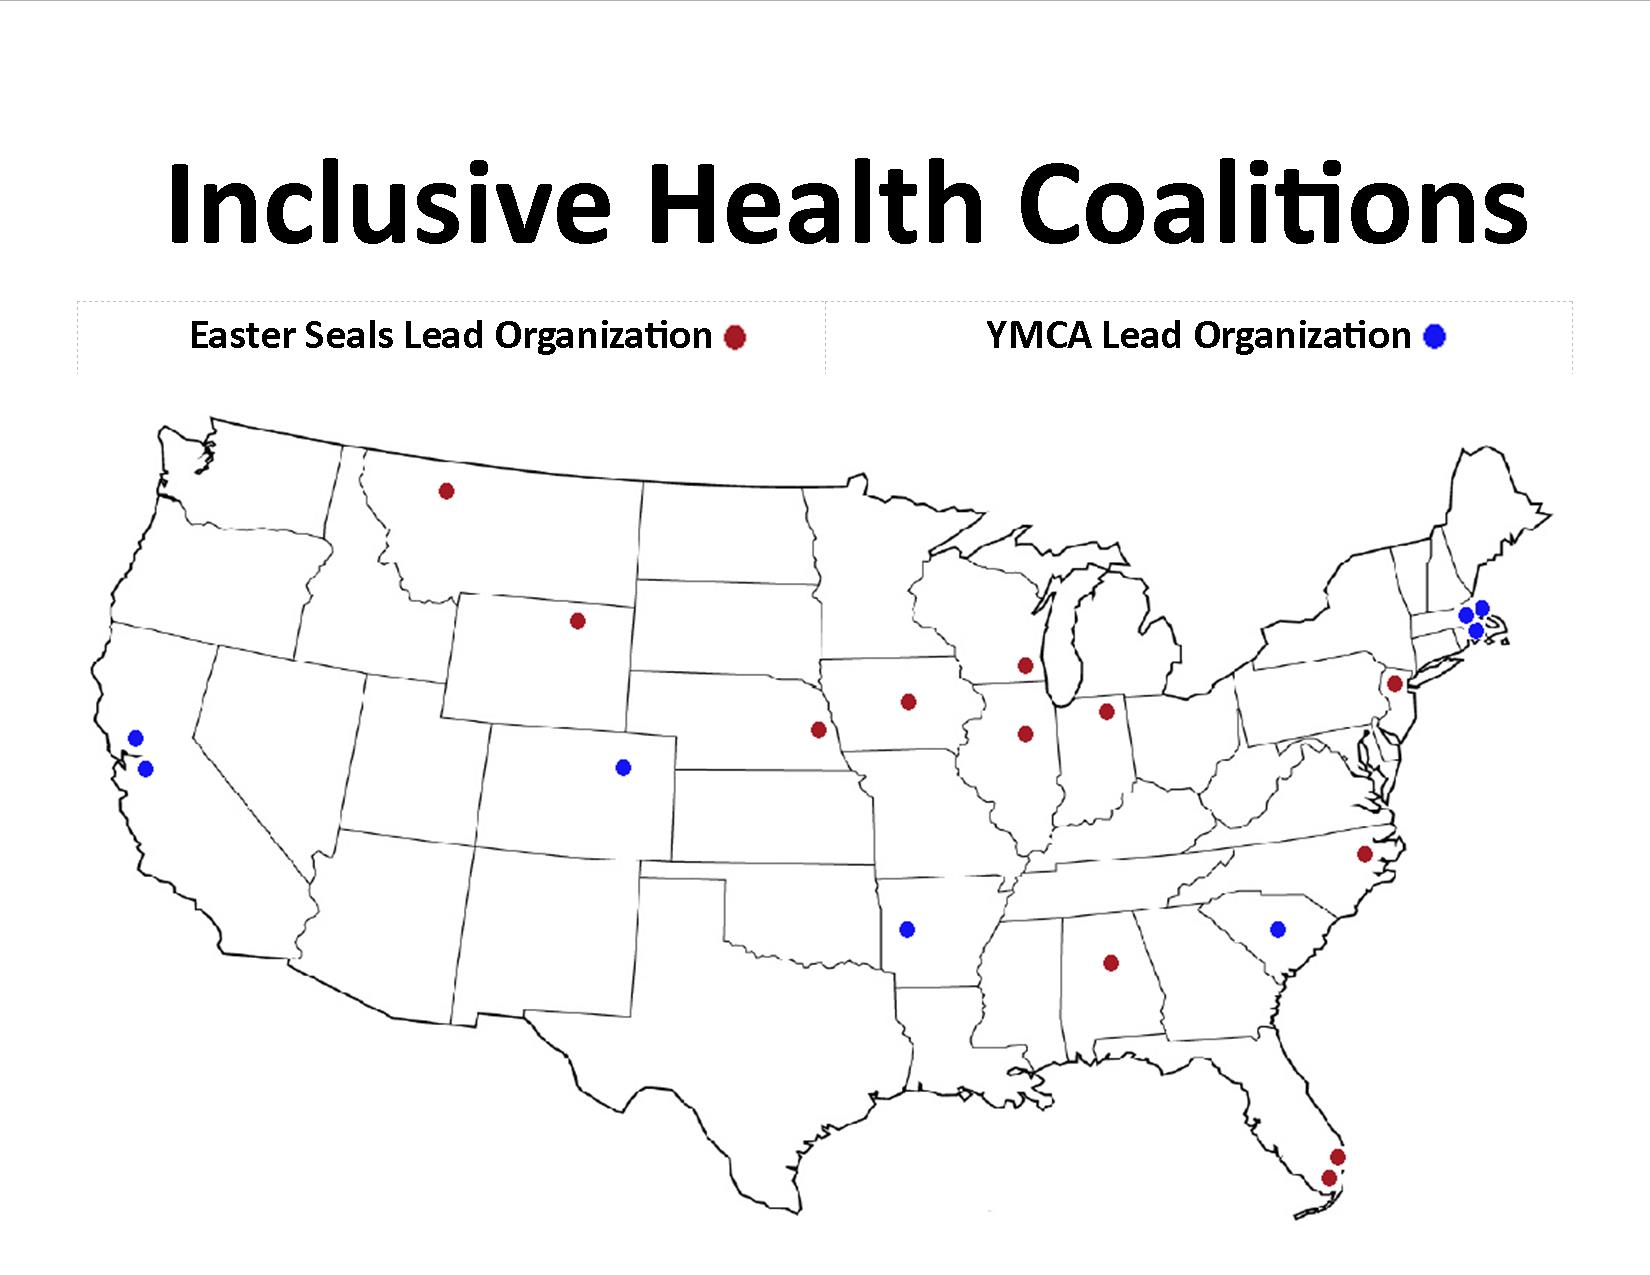 a map highlighting the locations of 20 inclusive health coalitions across the US